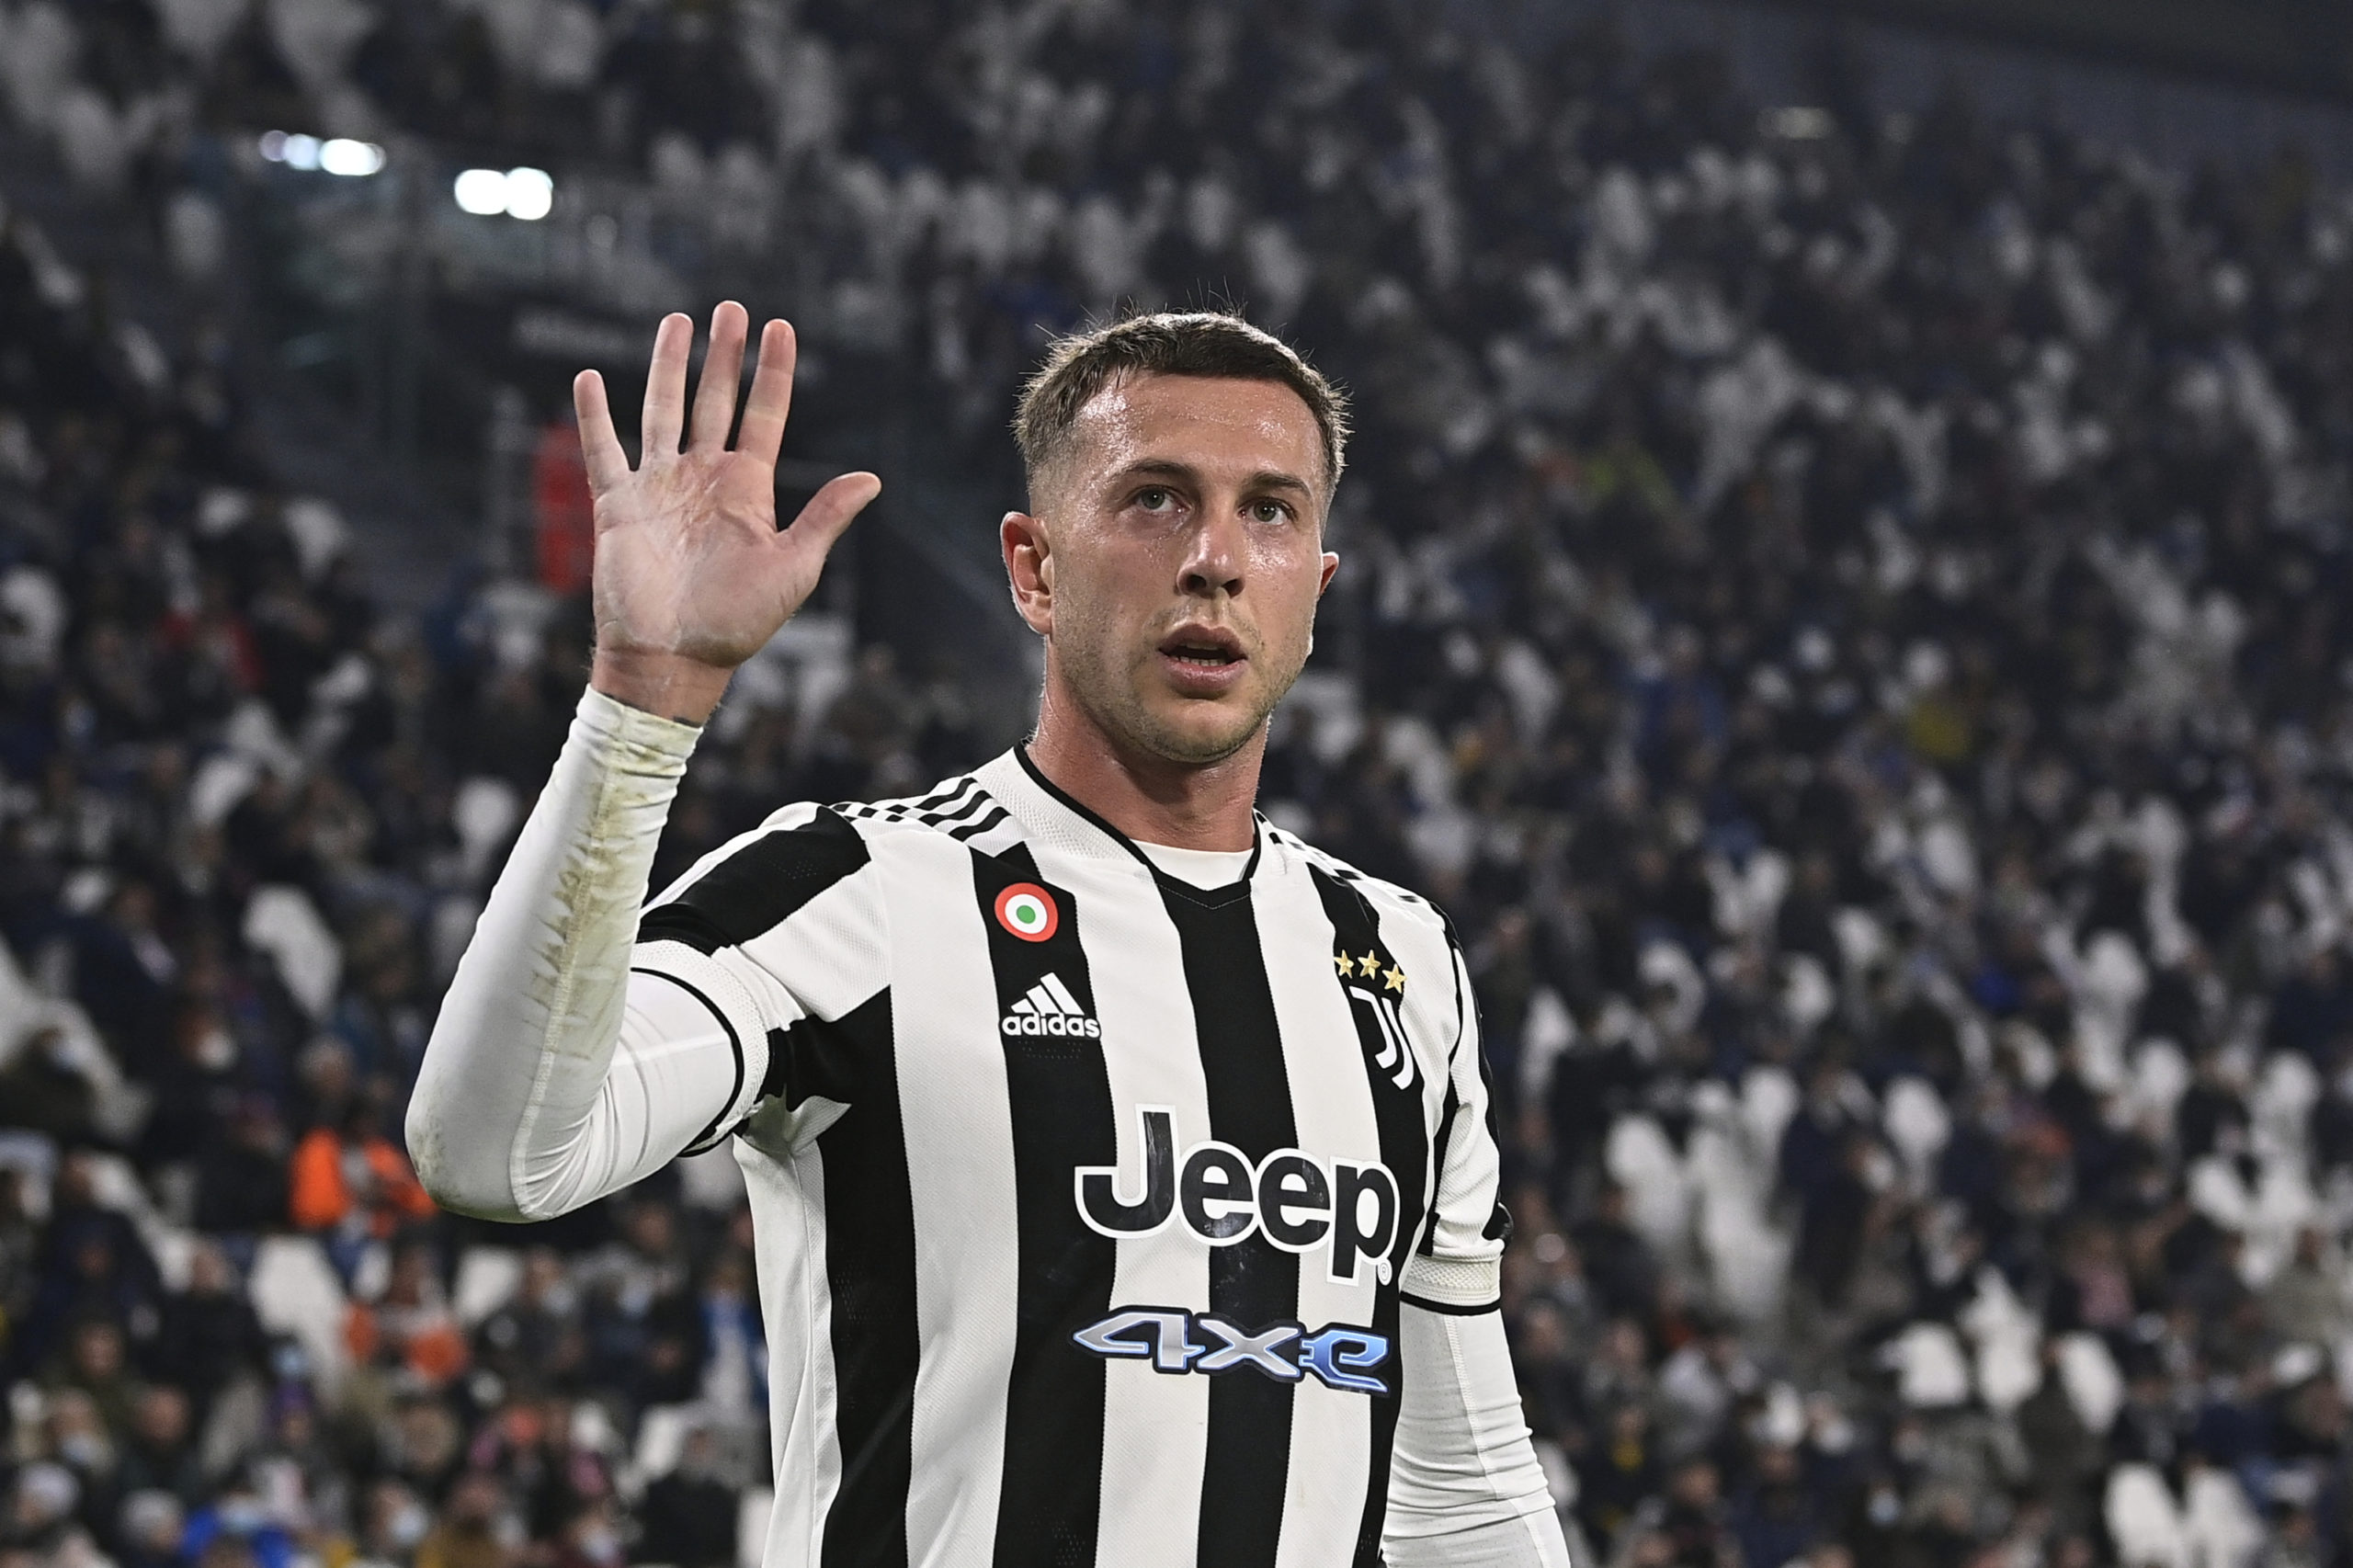 Amid Giorgio Chiellini and Paulo Dybala’s farewells from Juventus, Federico Bernardeschi was a forgotten figure, but he is leaving too and Napoli are keen.